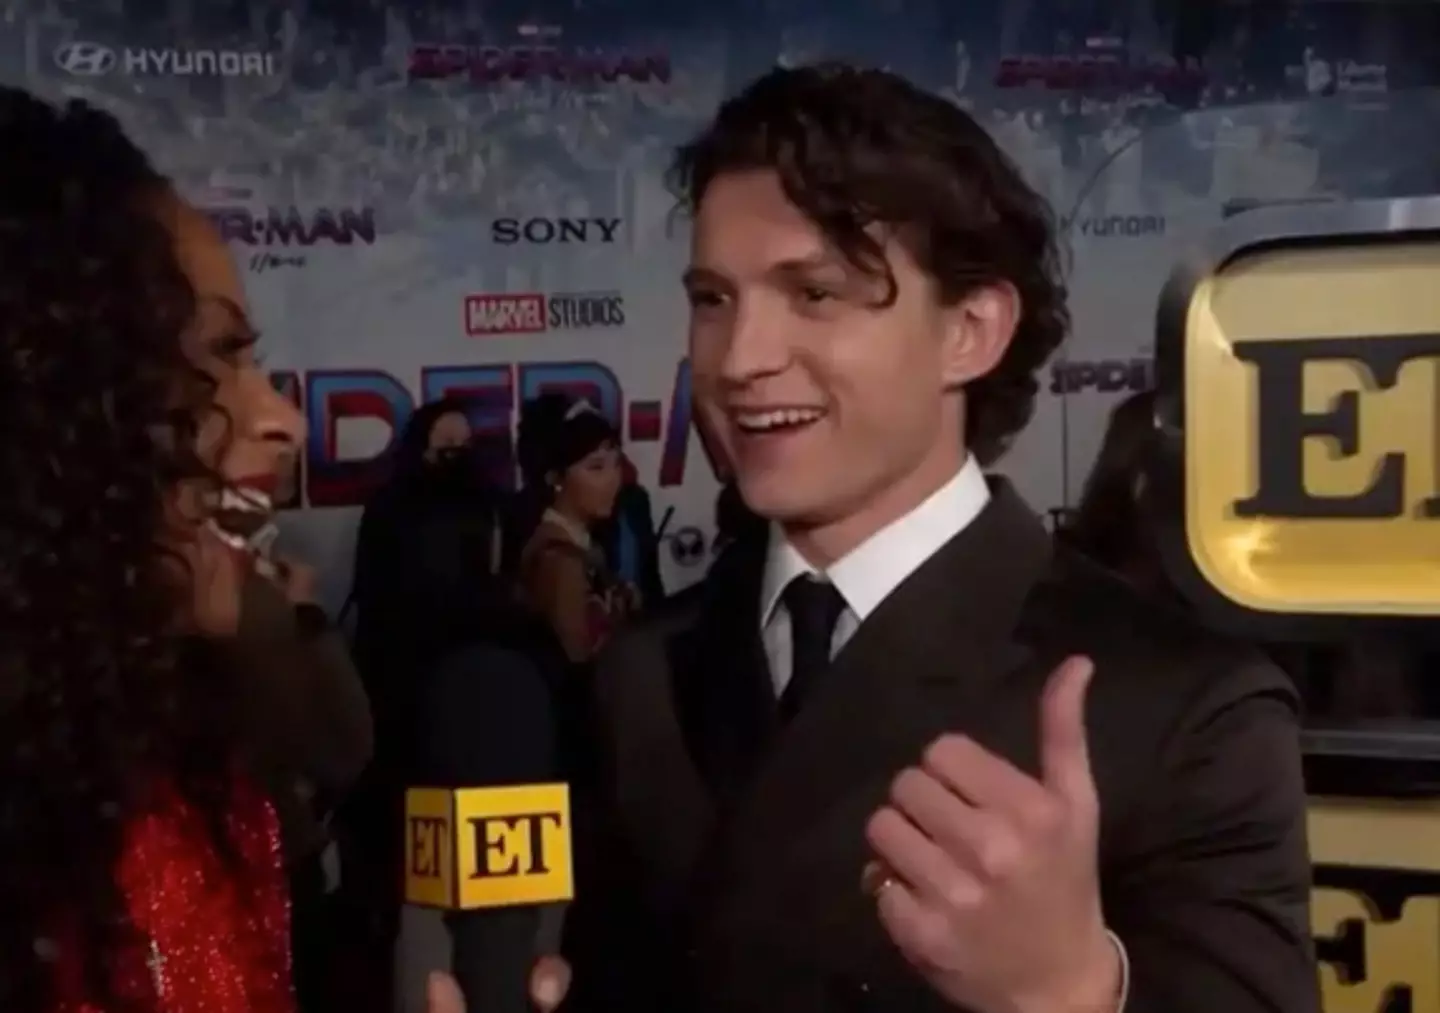 Tom Holland stopped the interview when he heard Zendaya arrive.